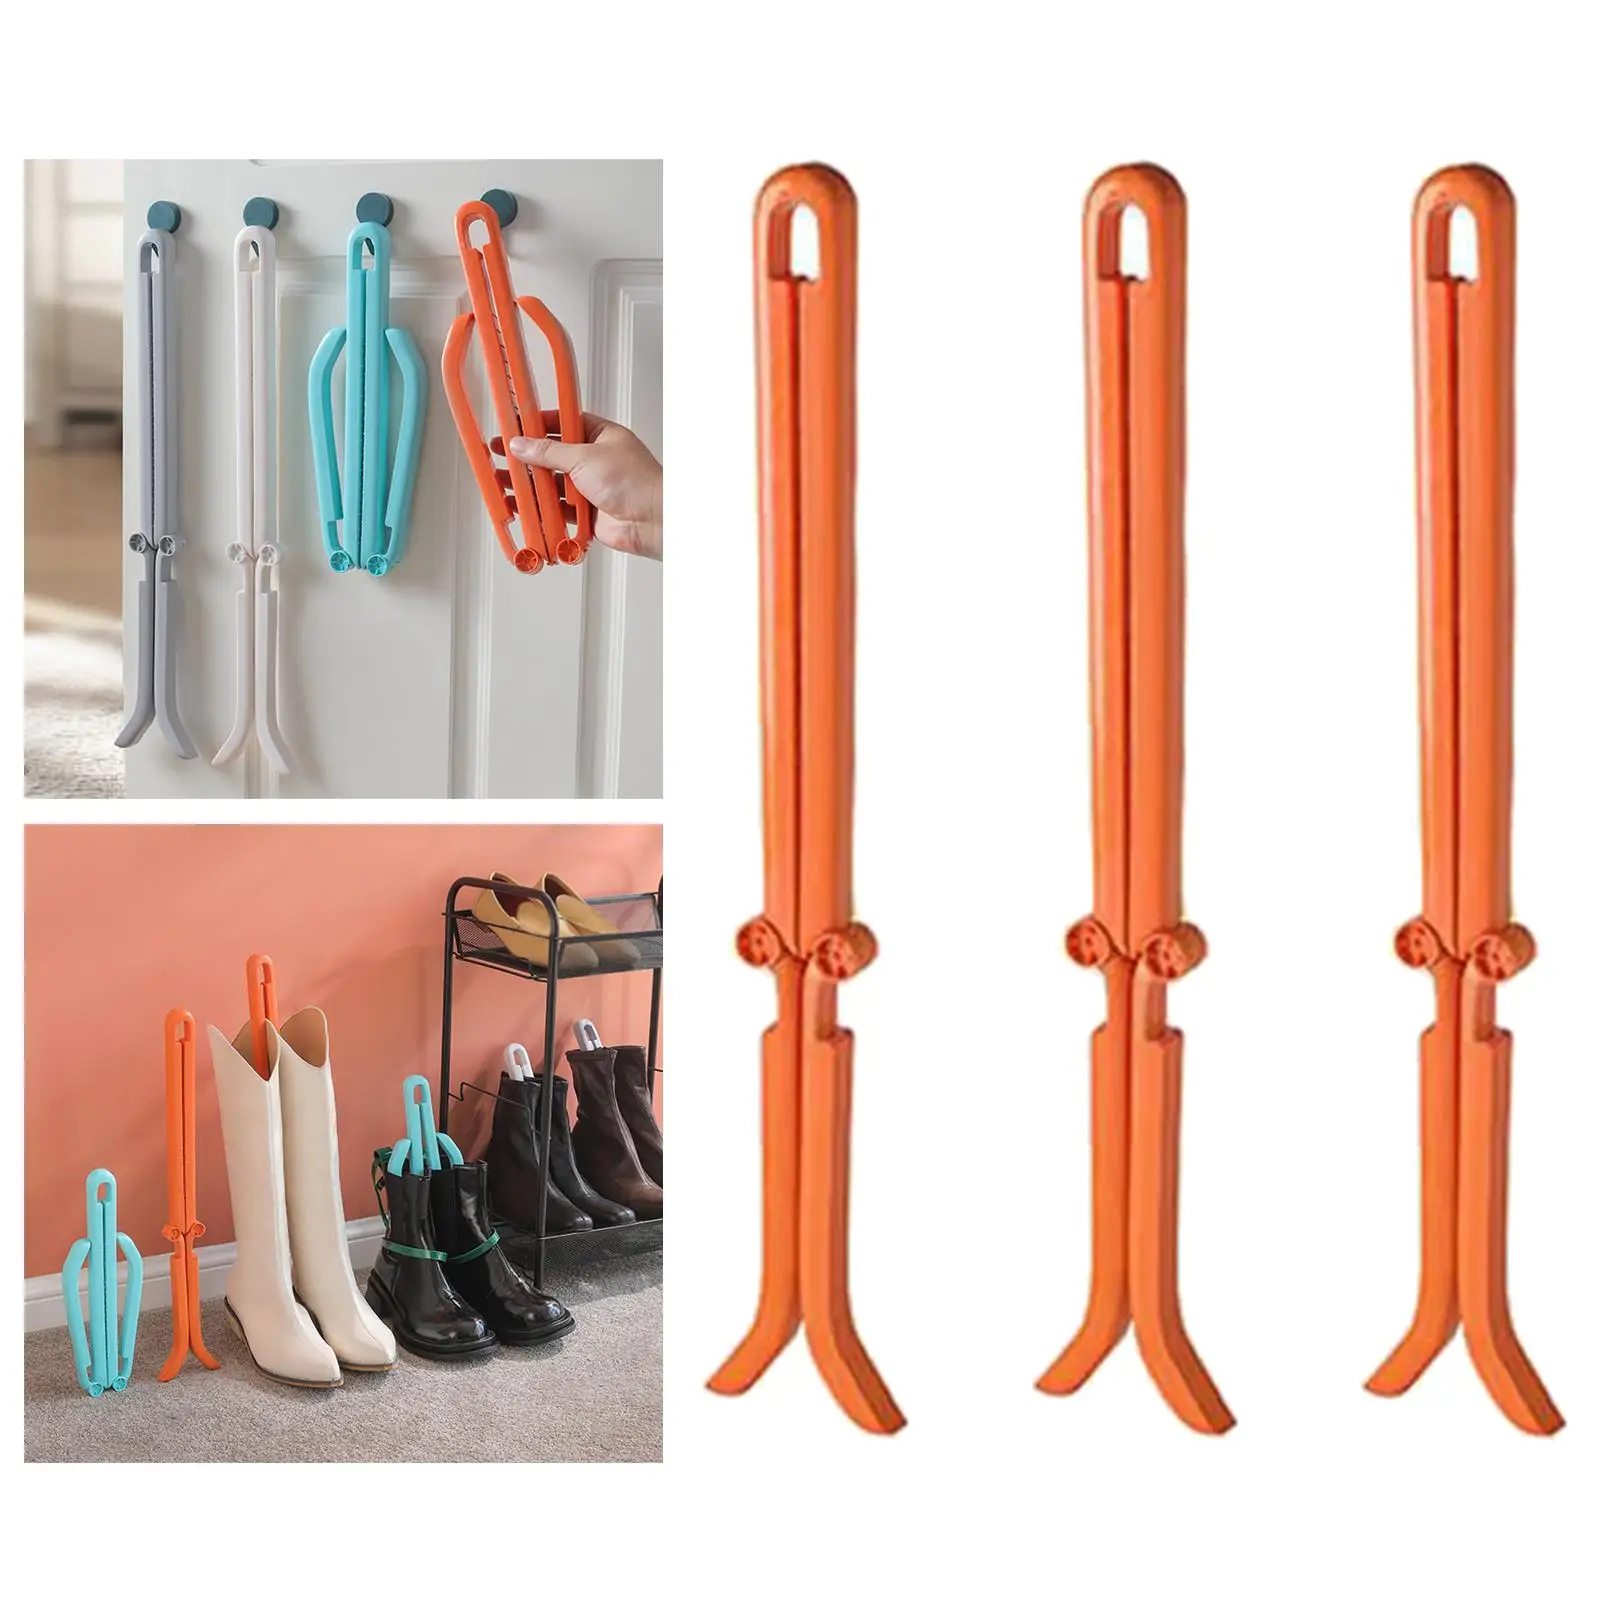 Folding Boot Shaper Stands Boots Knee High Shoes Clip Support Stand Plastic Long Boots Stretcher Shoes Supporter Holder Hanger Pack of 4 Random Colors 